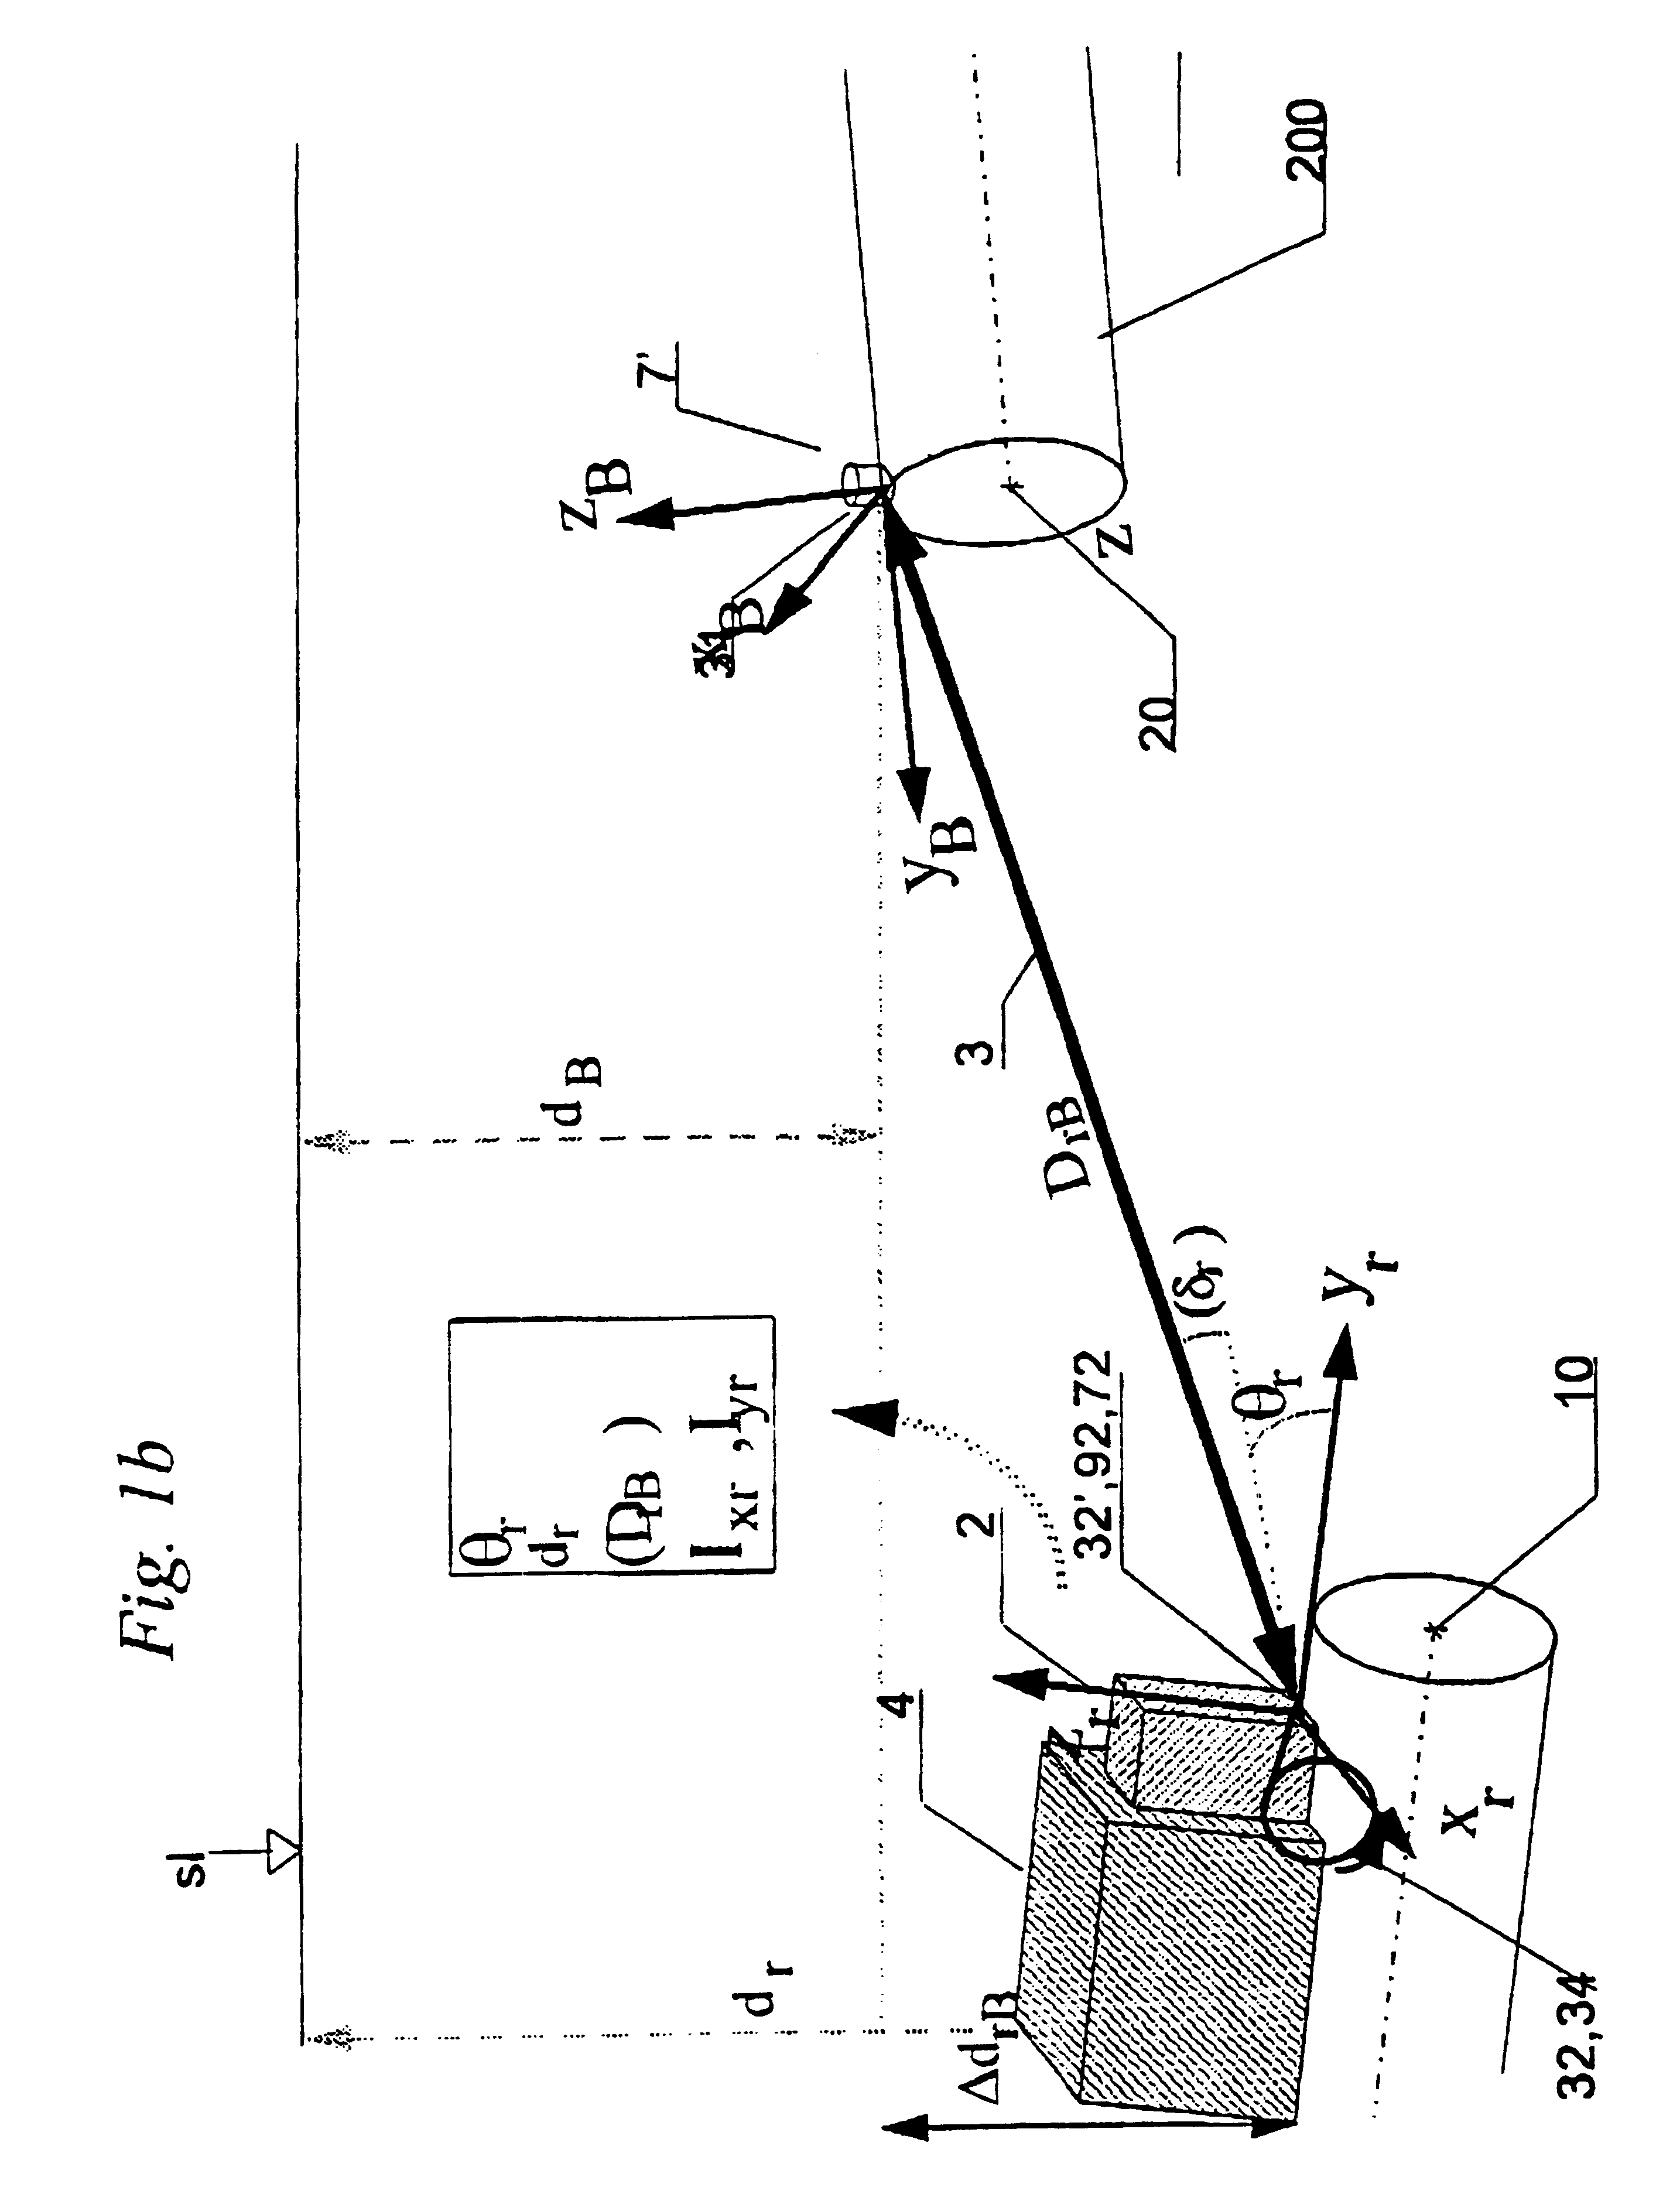 System for subsea diverless metrology and hard-pipe connection of pipelines